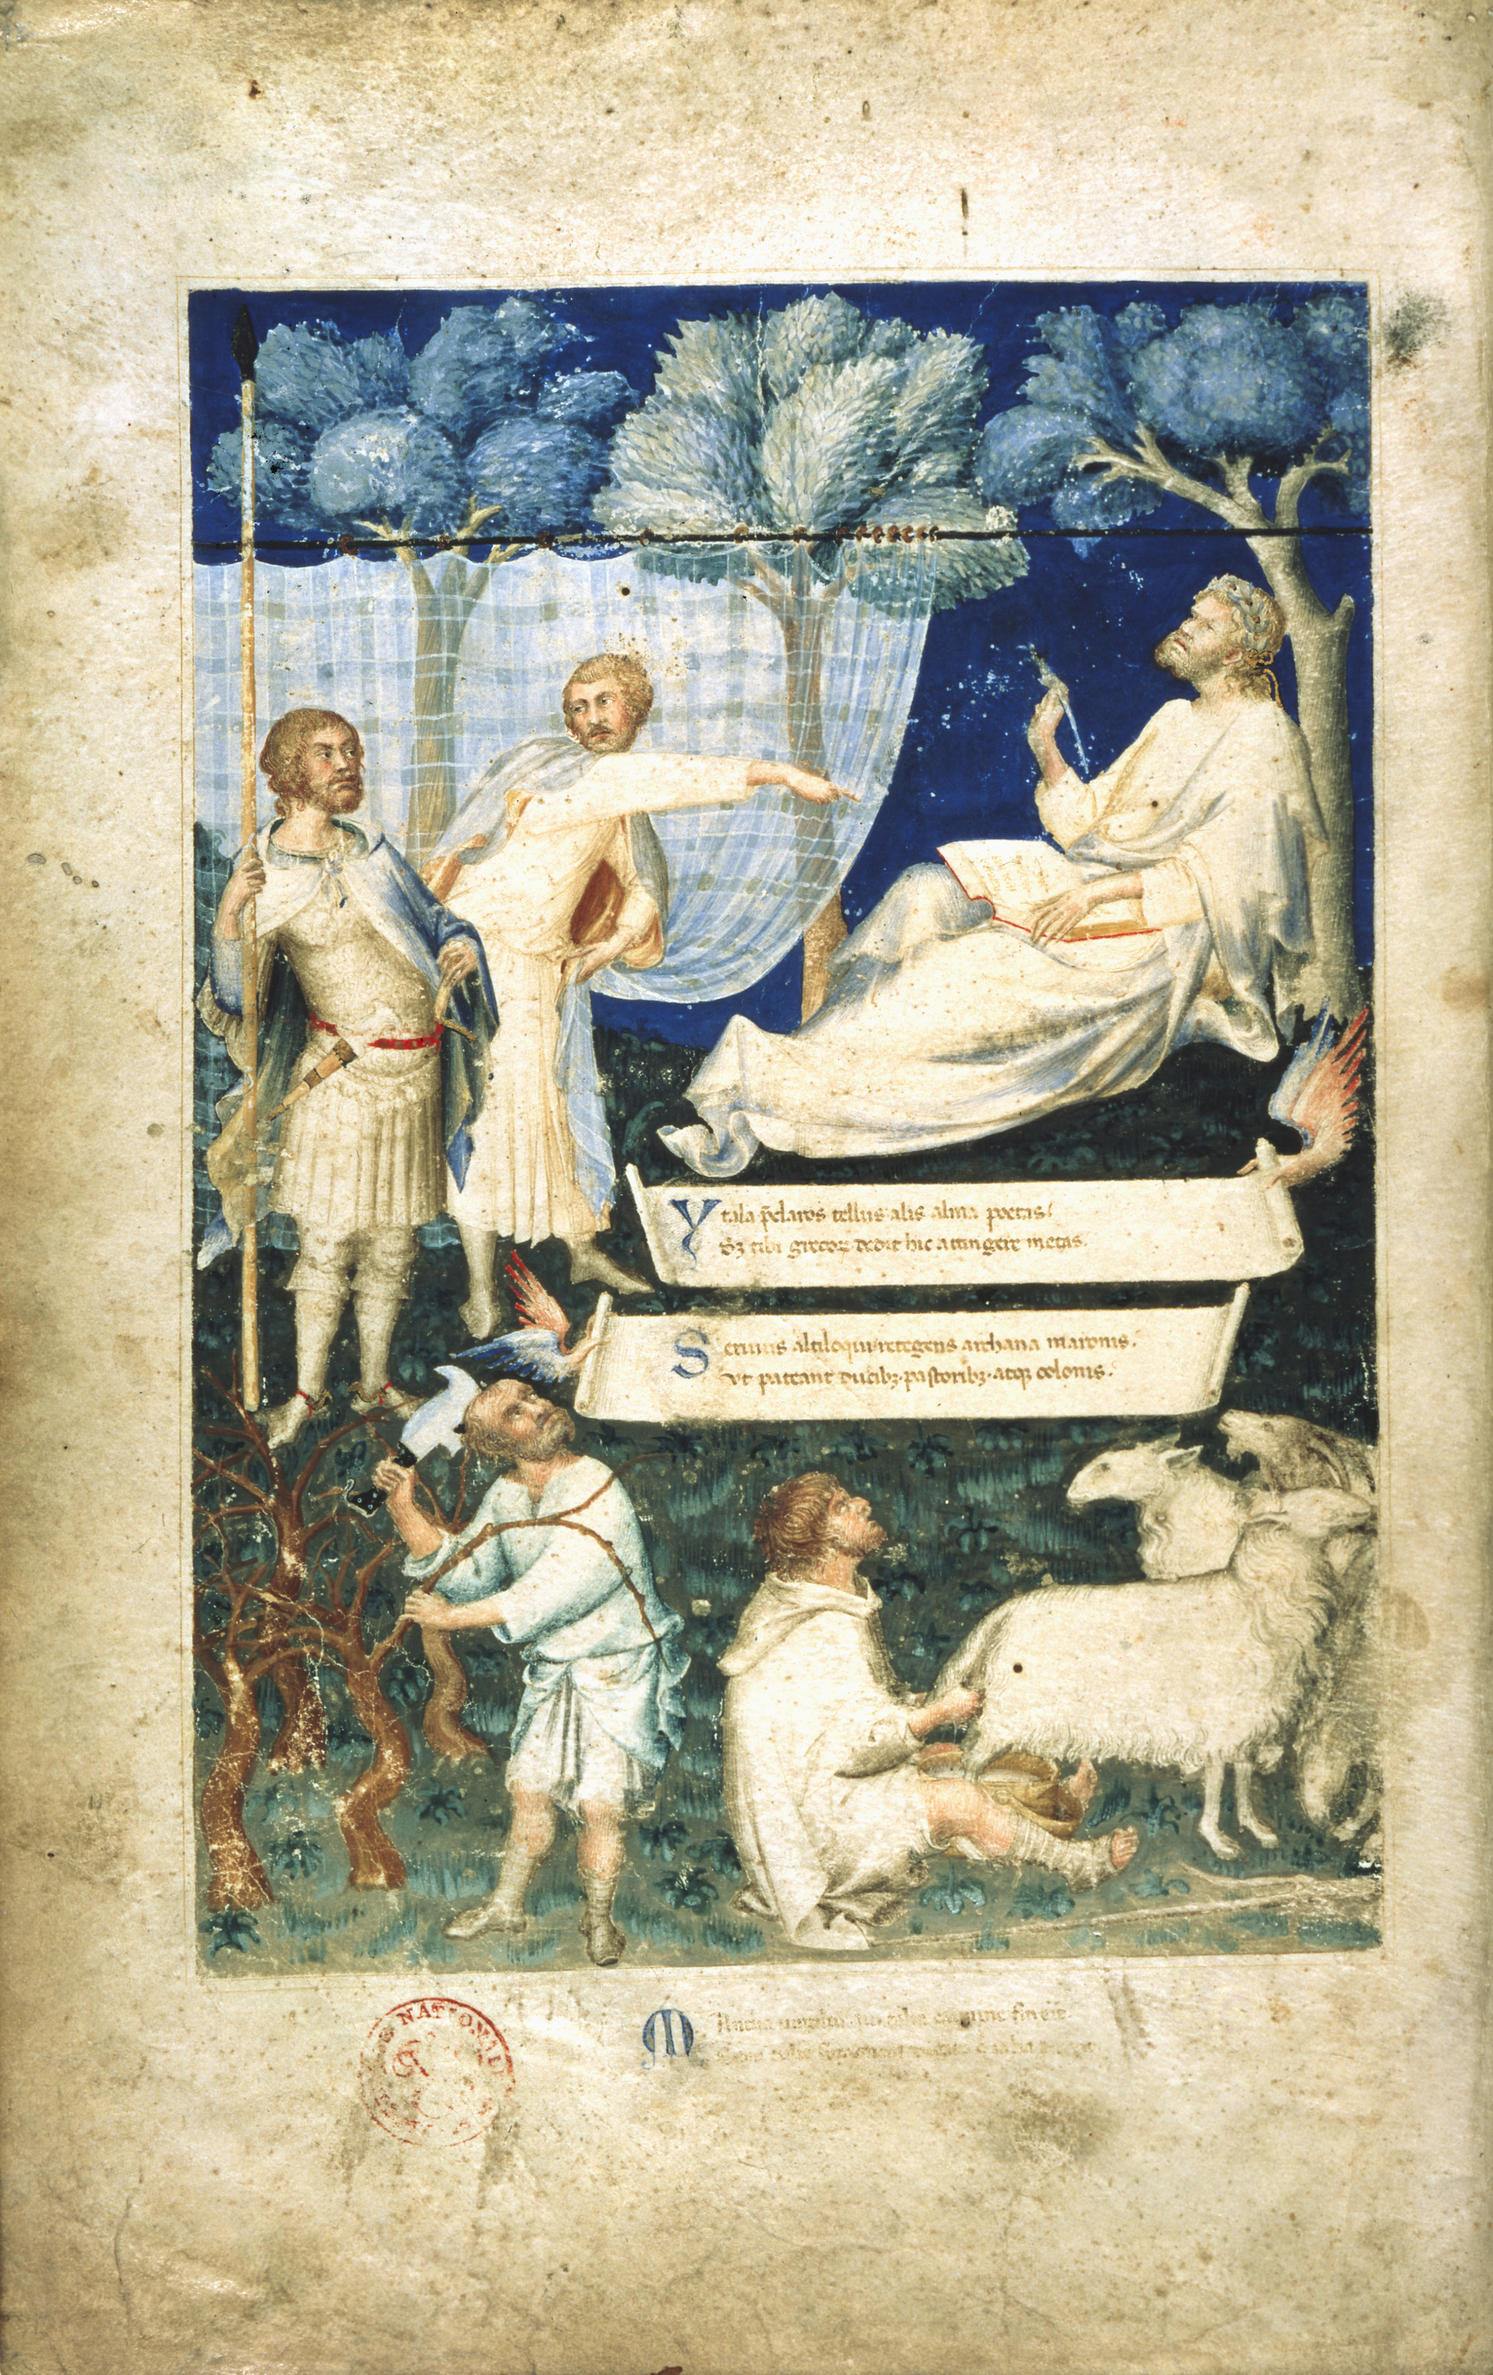 Simone Martini, An Allegory of Virgil: Frontispiece to a Manuscript of the Works of Virgil,1338. Tempera on parchment. Biblioteca Ambrosiana, Milan, S.P. 10/27